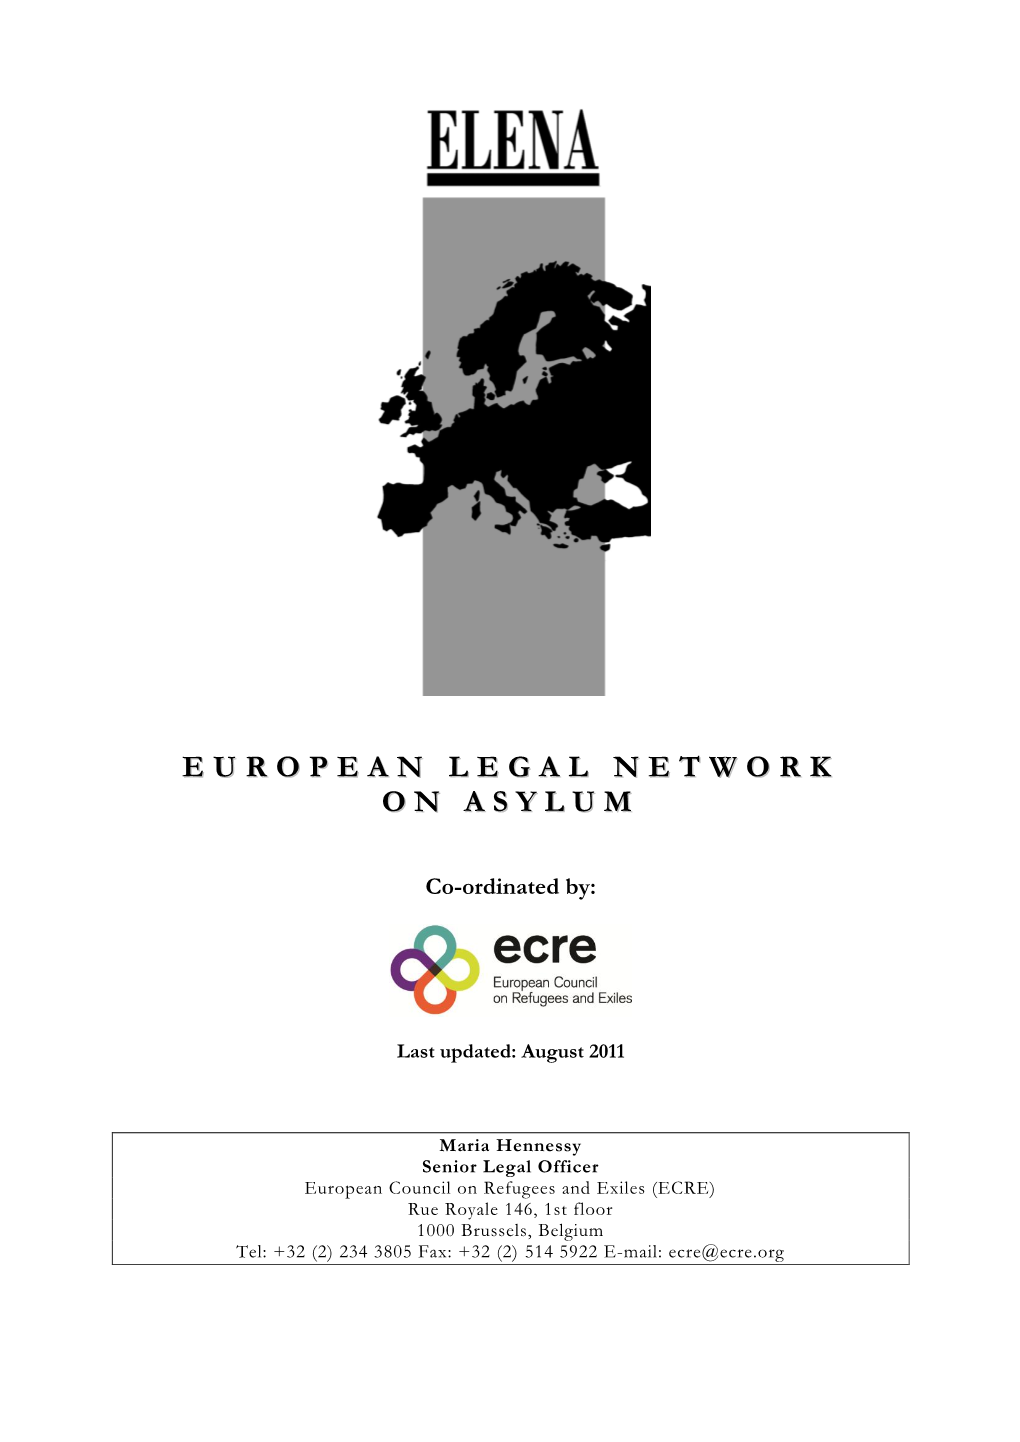 ELENA Index of Useful Addresses Lists Organisations and Individuals Providing Legal Services and Other Forms of Support to Refugees and Asylum Seekers in Europe